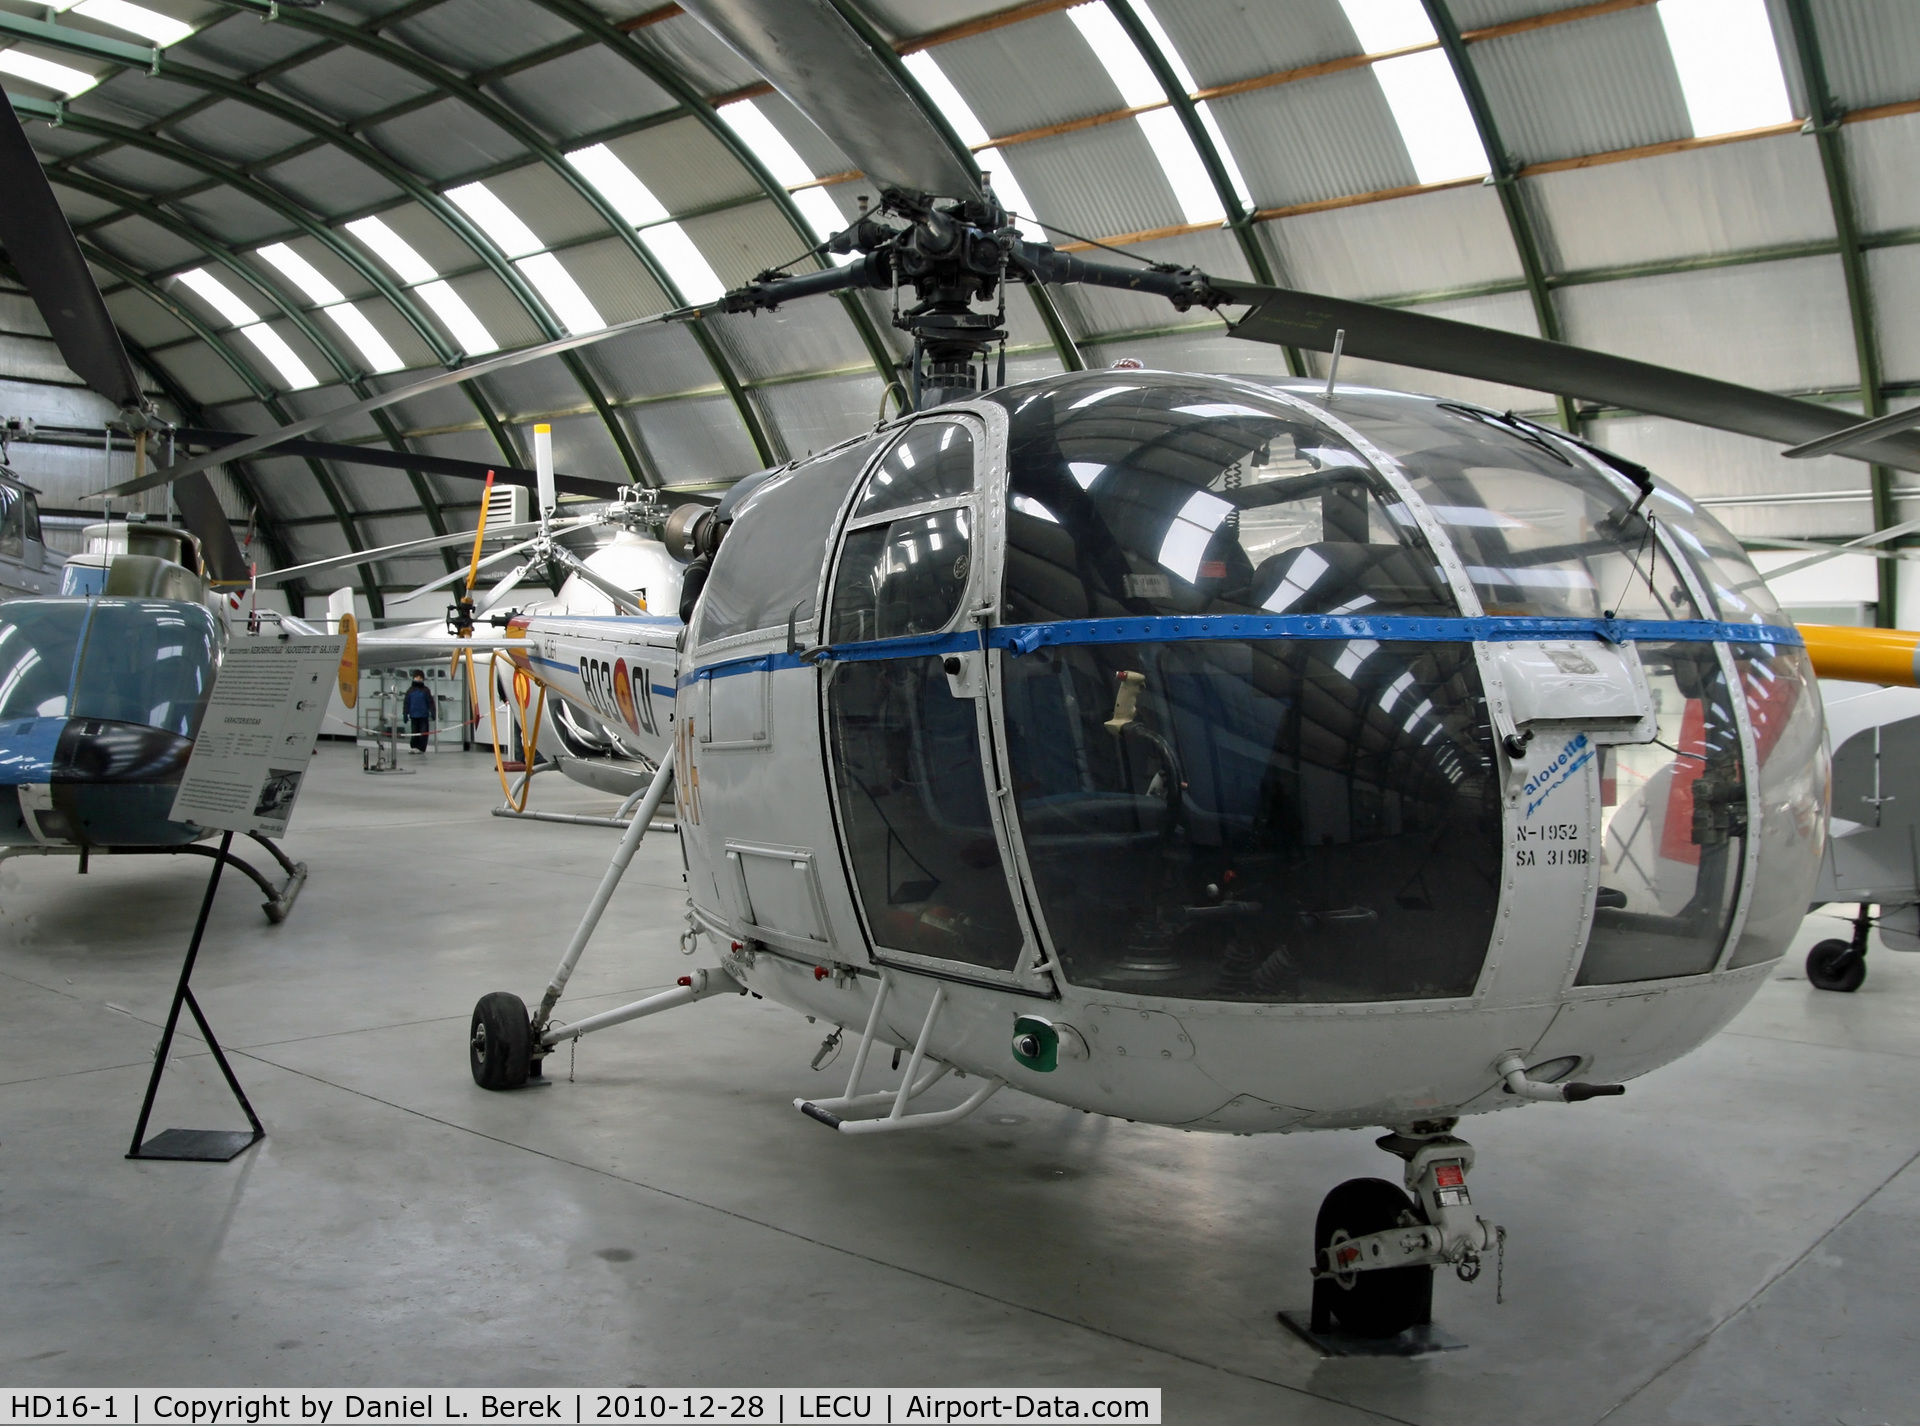 HD16-1, Aerospatiale SA-319B Alouette III C/N 1952, Search and rescue helicopter on display at Museo del Aire